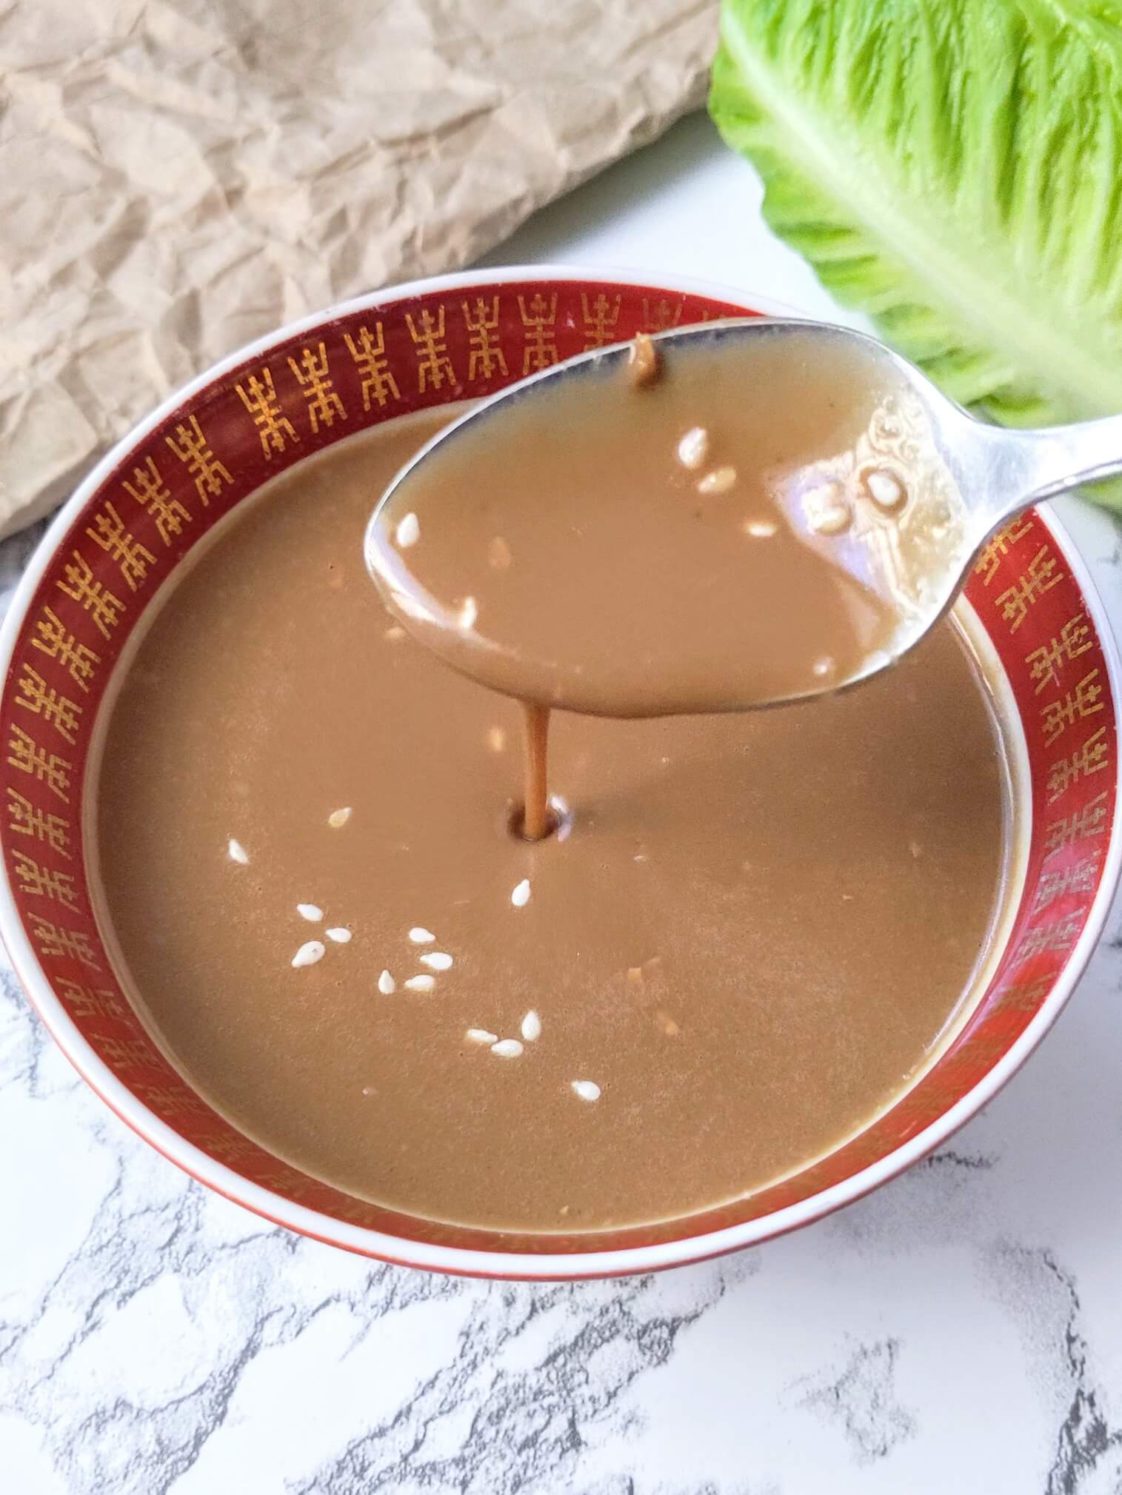 sesame ginger salad dressing with spoon